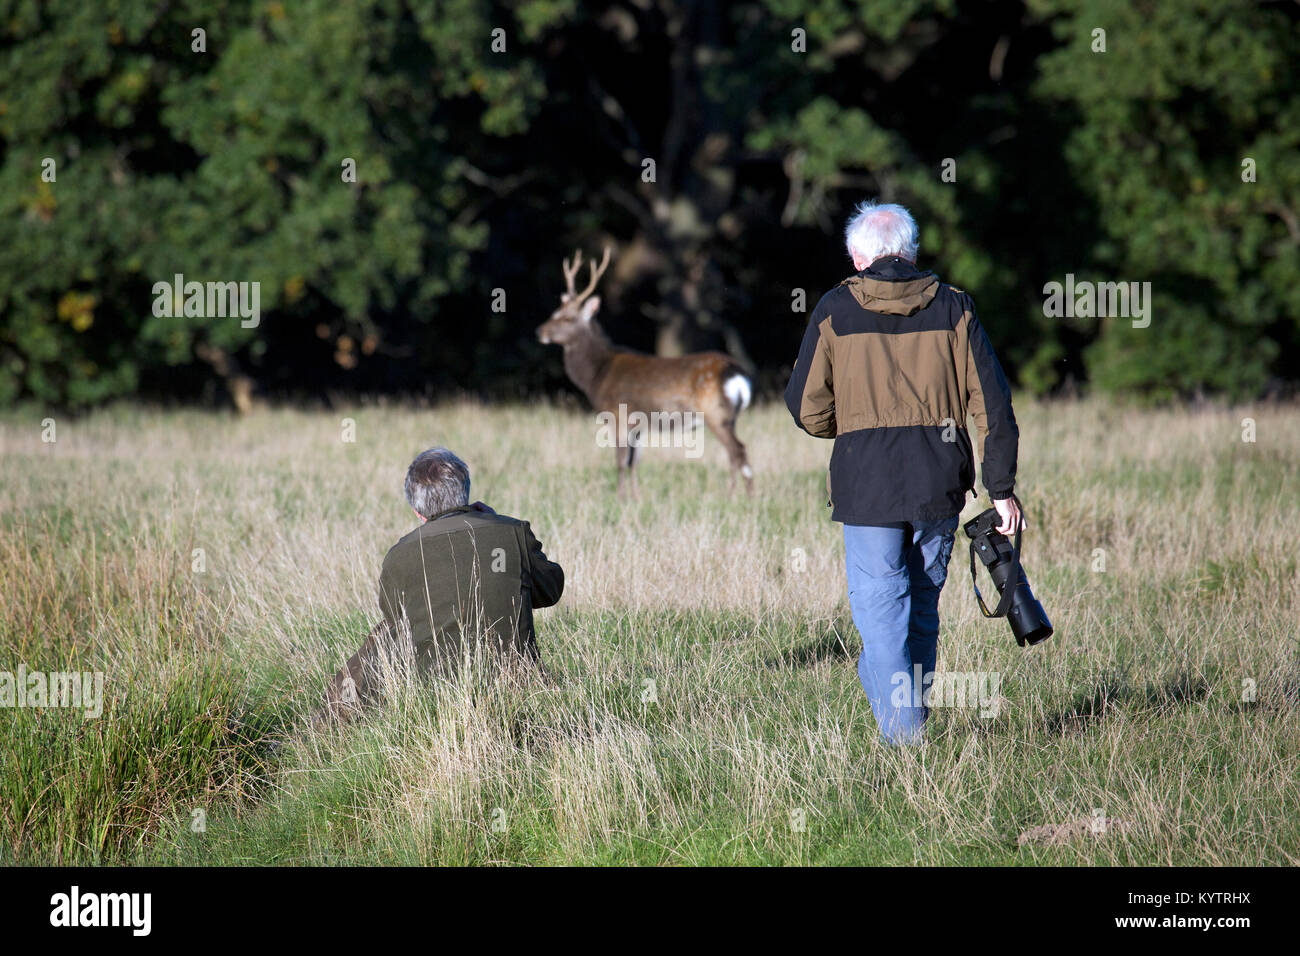 Wildlife photographers / nature photographer approaching Sika deer / spotted deer/ Japanese deer (Cervus nippon) stag in autumn forest Stock Photo